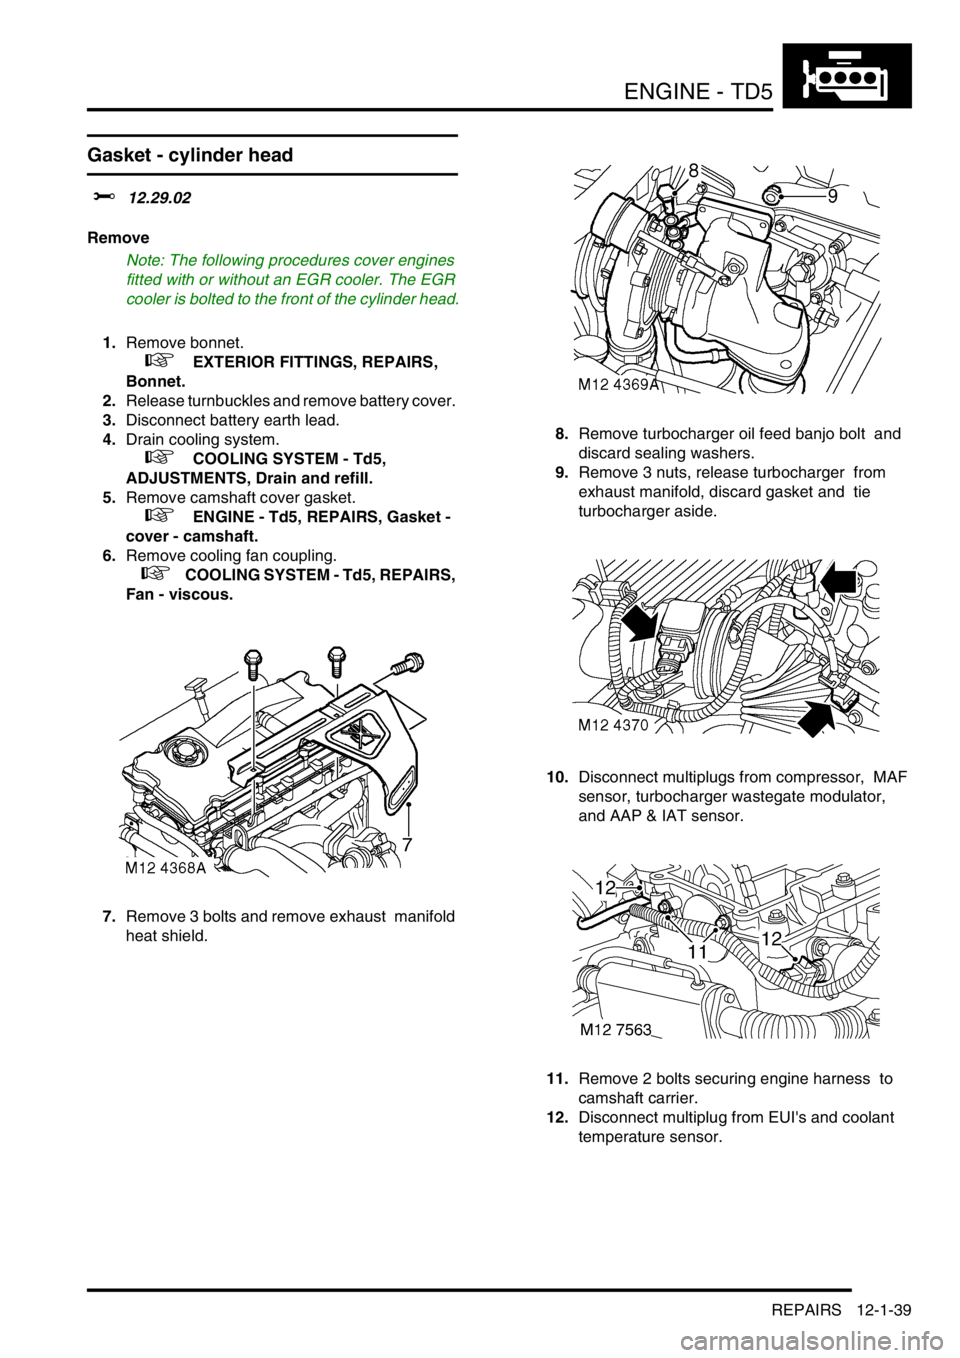 LAND ROVER DISCOVERY 2002 User Guide ENGINE - TD5
REPAIRS 12-1-39
Gasket - cylinder head  
$% 12.29.02 
Remove
Note: The following procedures cover engines 
fitted with or without an EGR cooler. The EGR 
cooler is bolted to the front of 